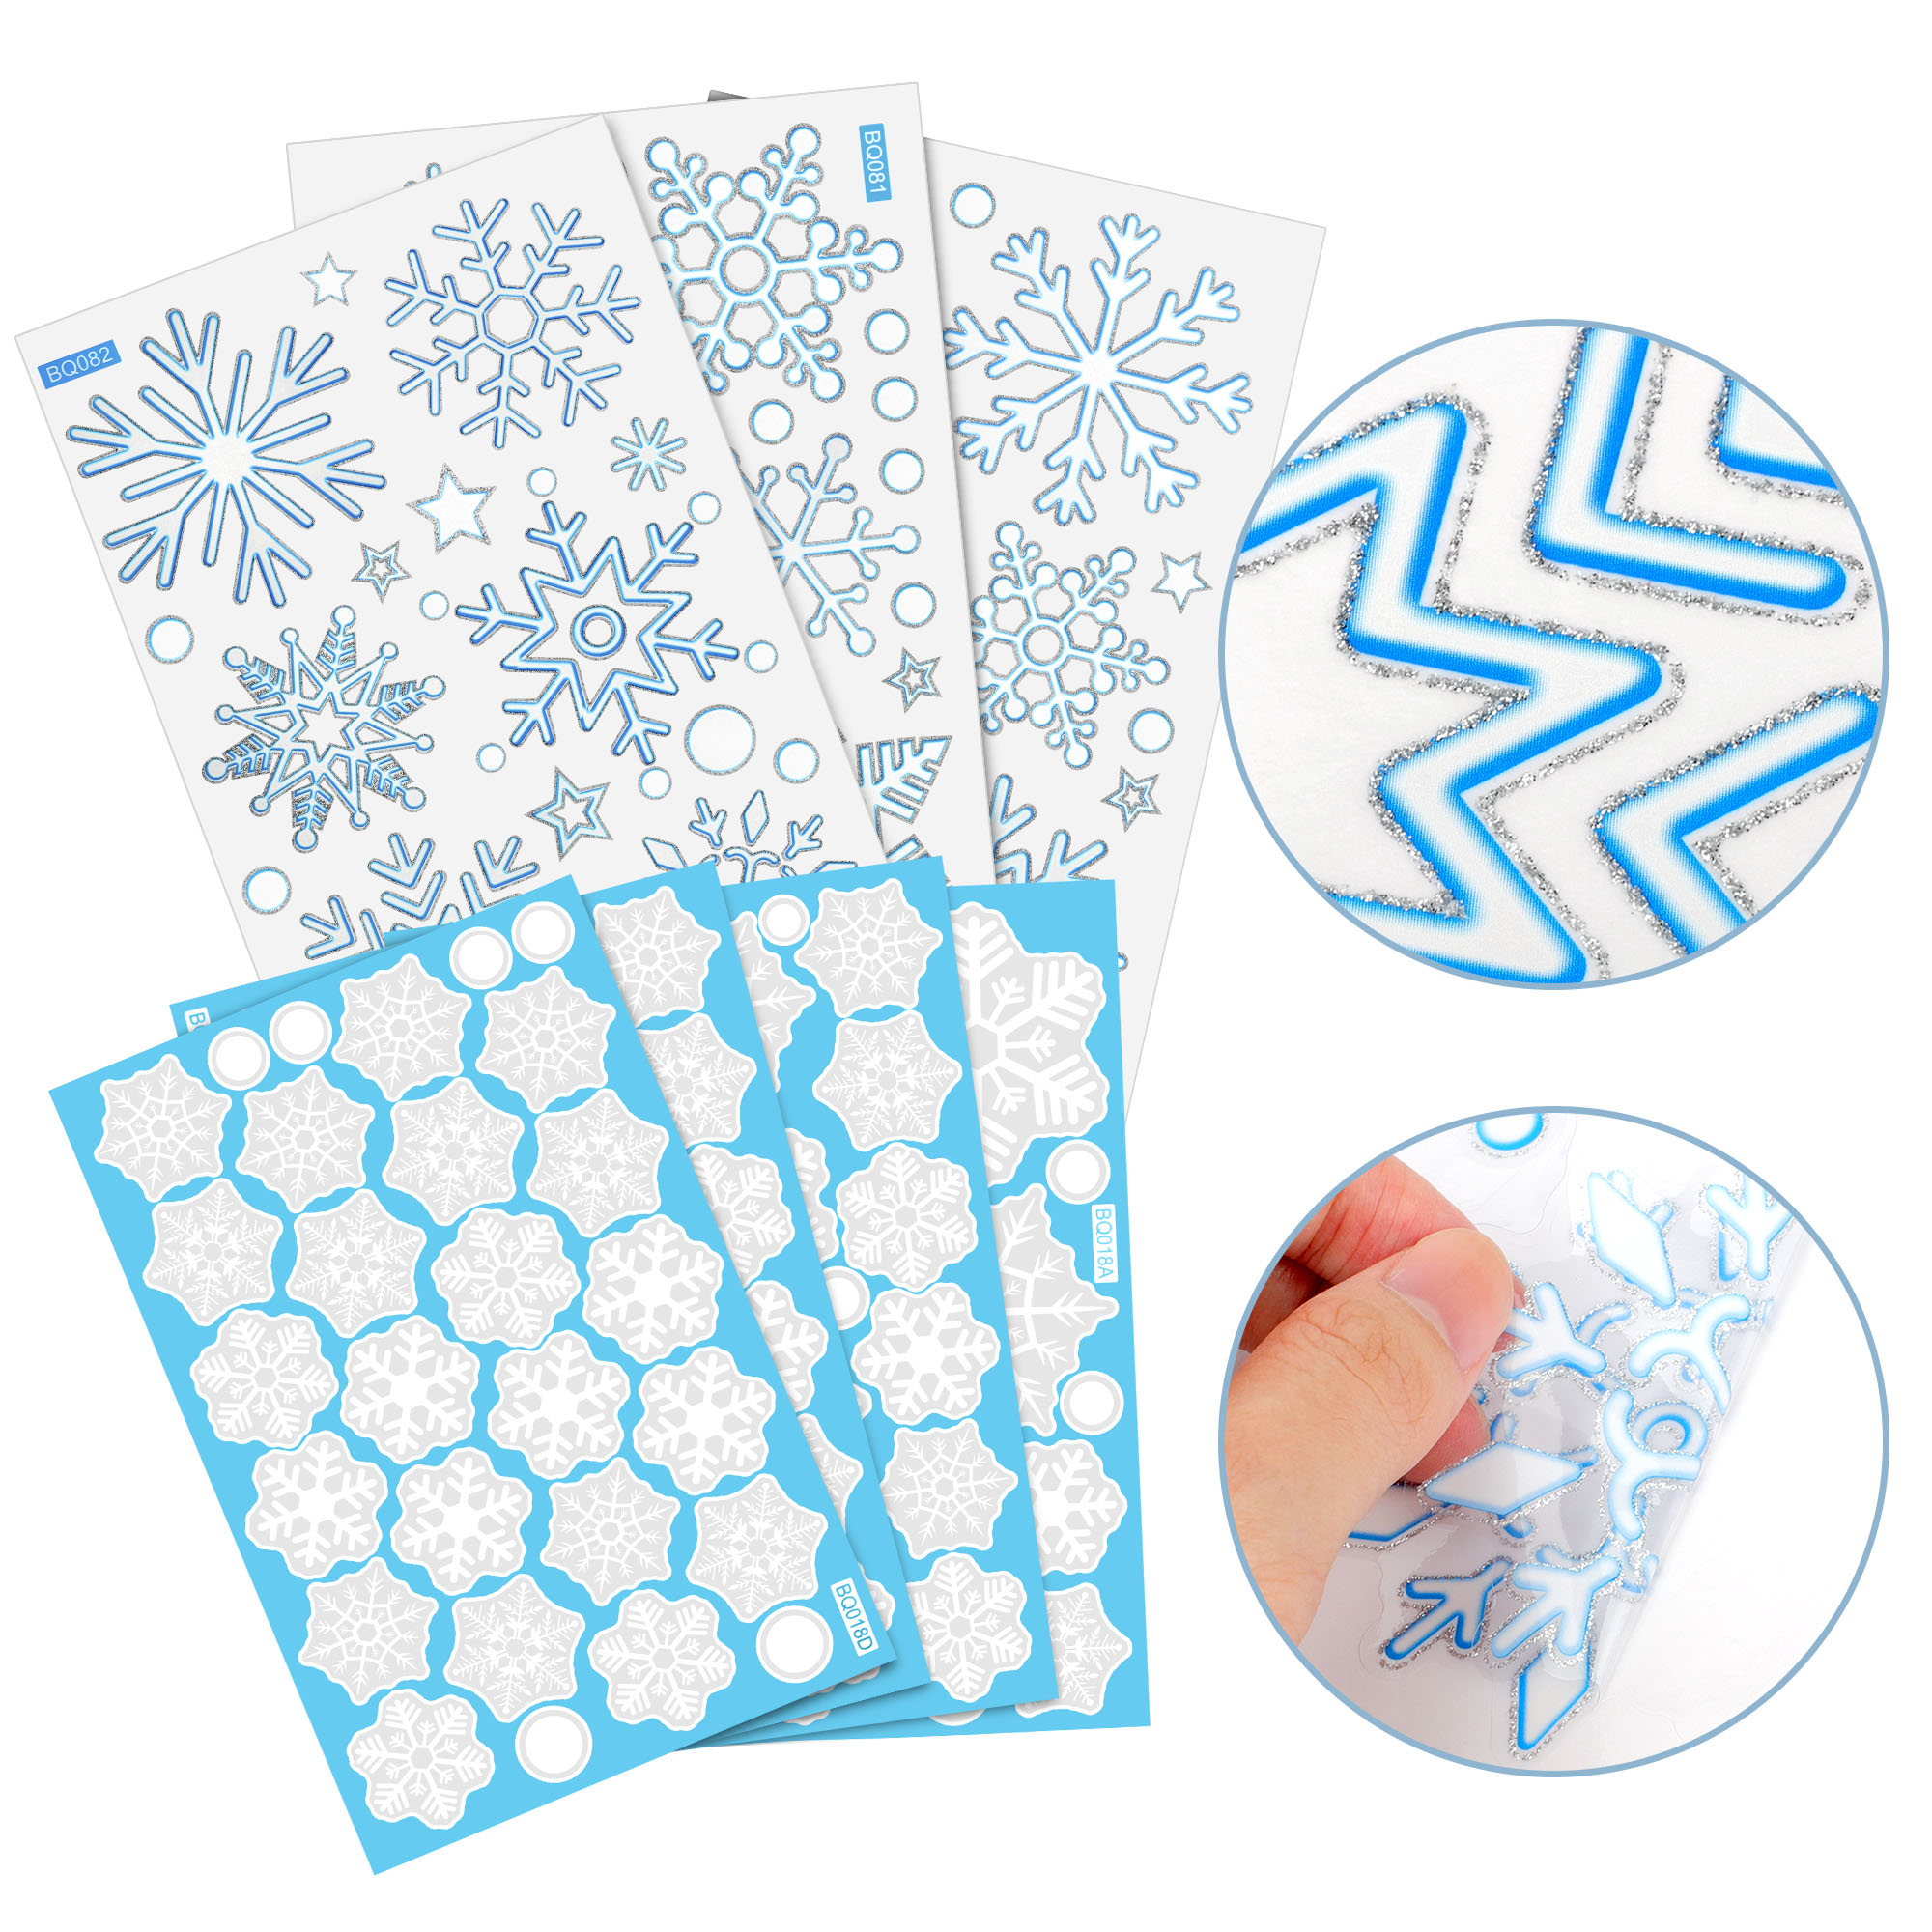 EEEkit 15 Sheet Christmas Snowflake Window Stickers Xmas Clings Decals with  Scraper for Home Office Party